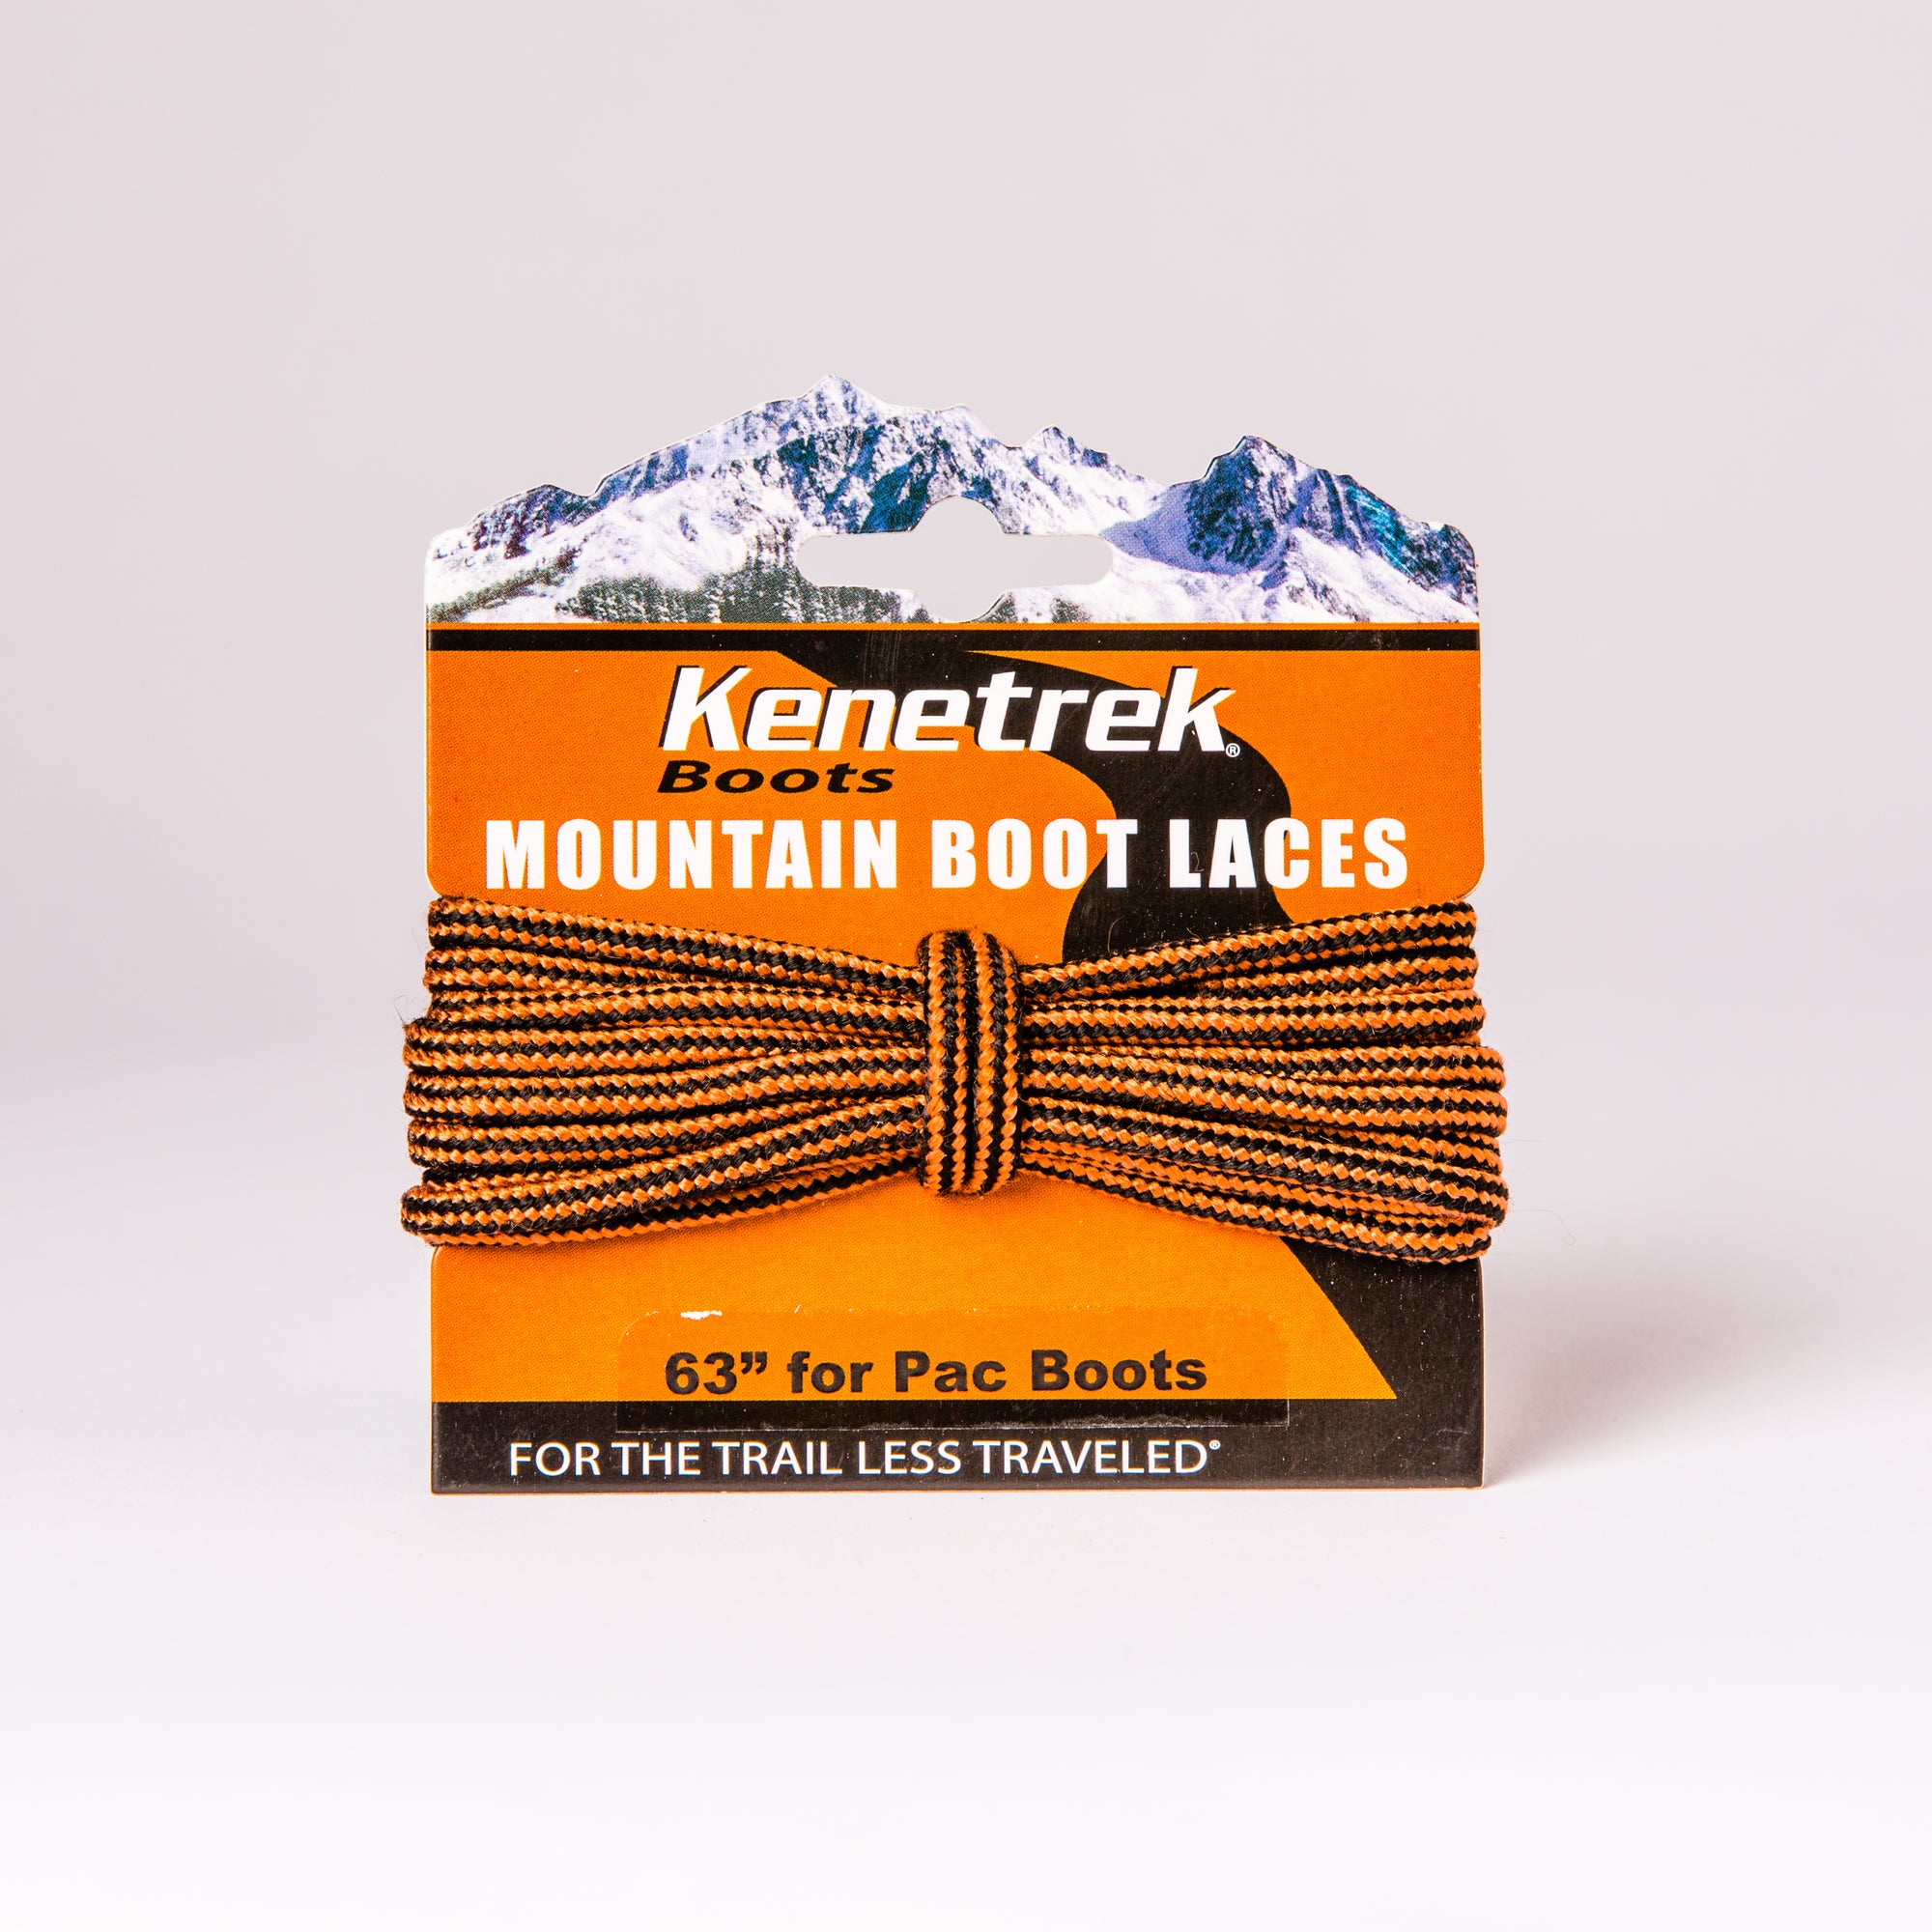 Kenetrek Mountain Boot Laces 63” for Pac Boots